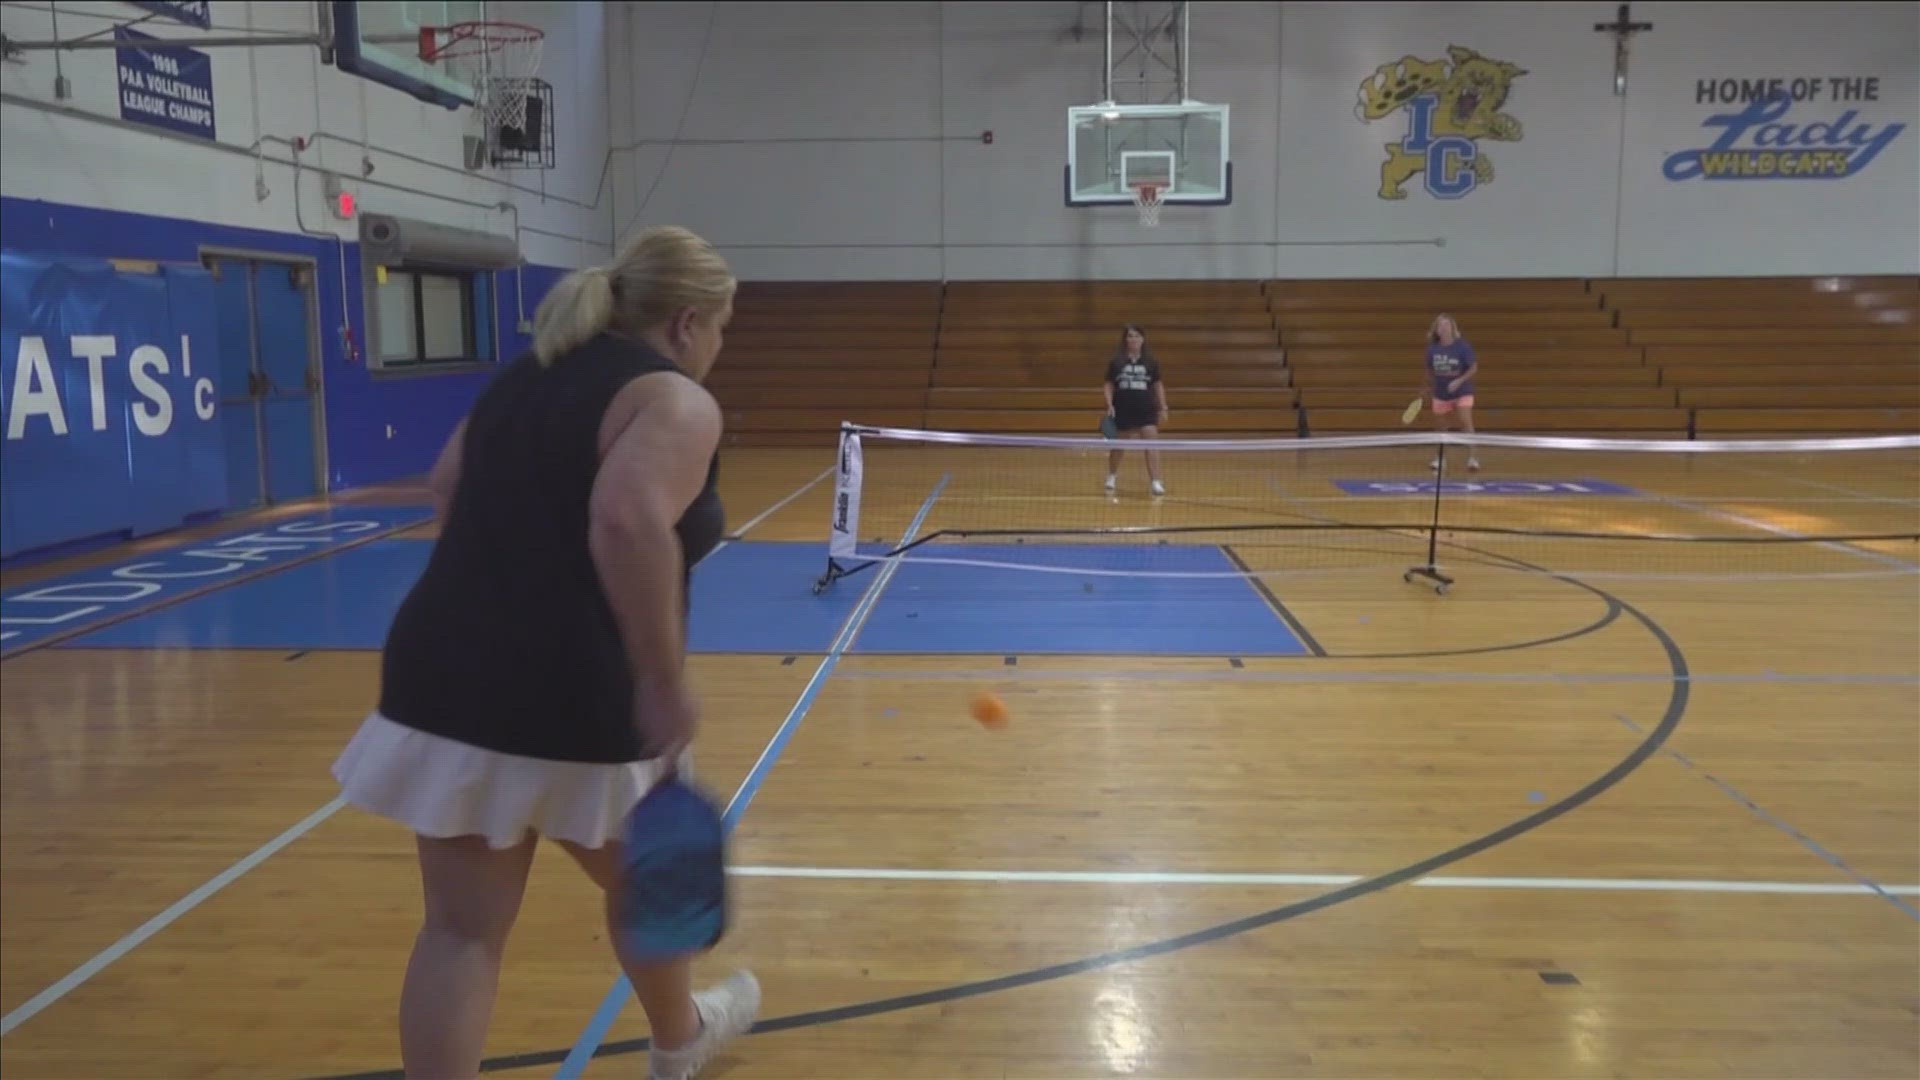 Experts said pickleball also helps with your physical health by improving hand-eye coordination, balance, and agility.